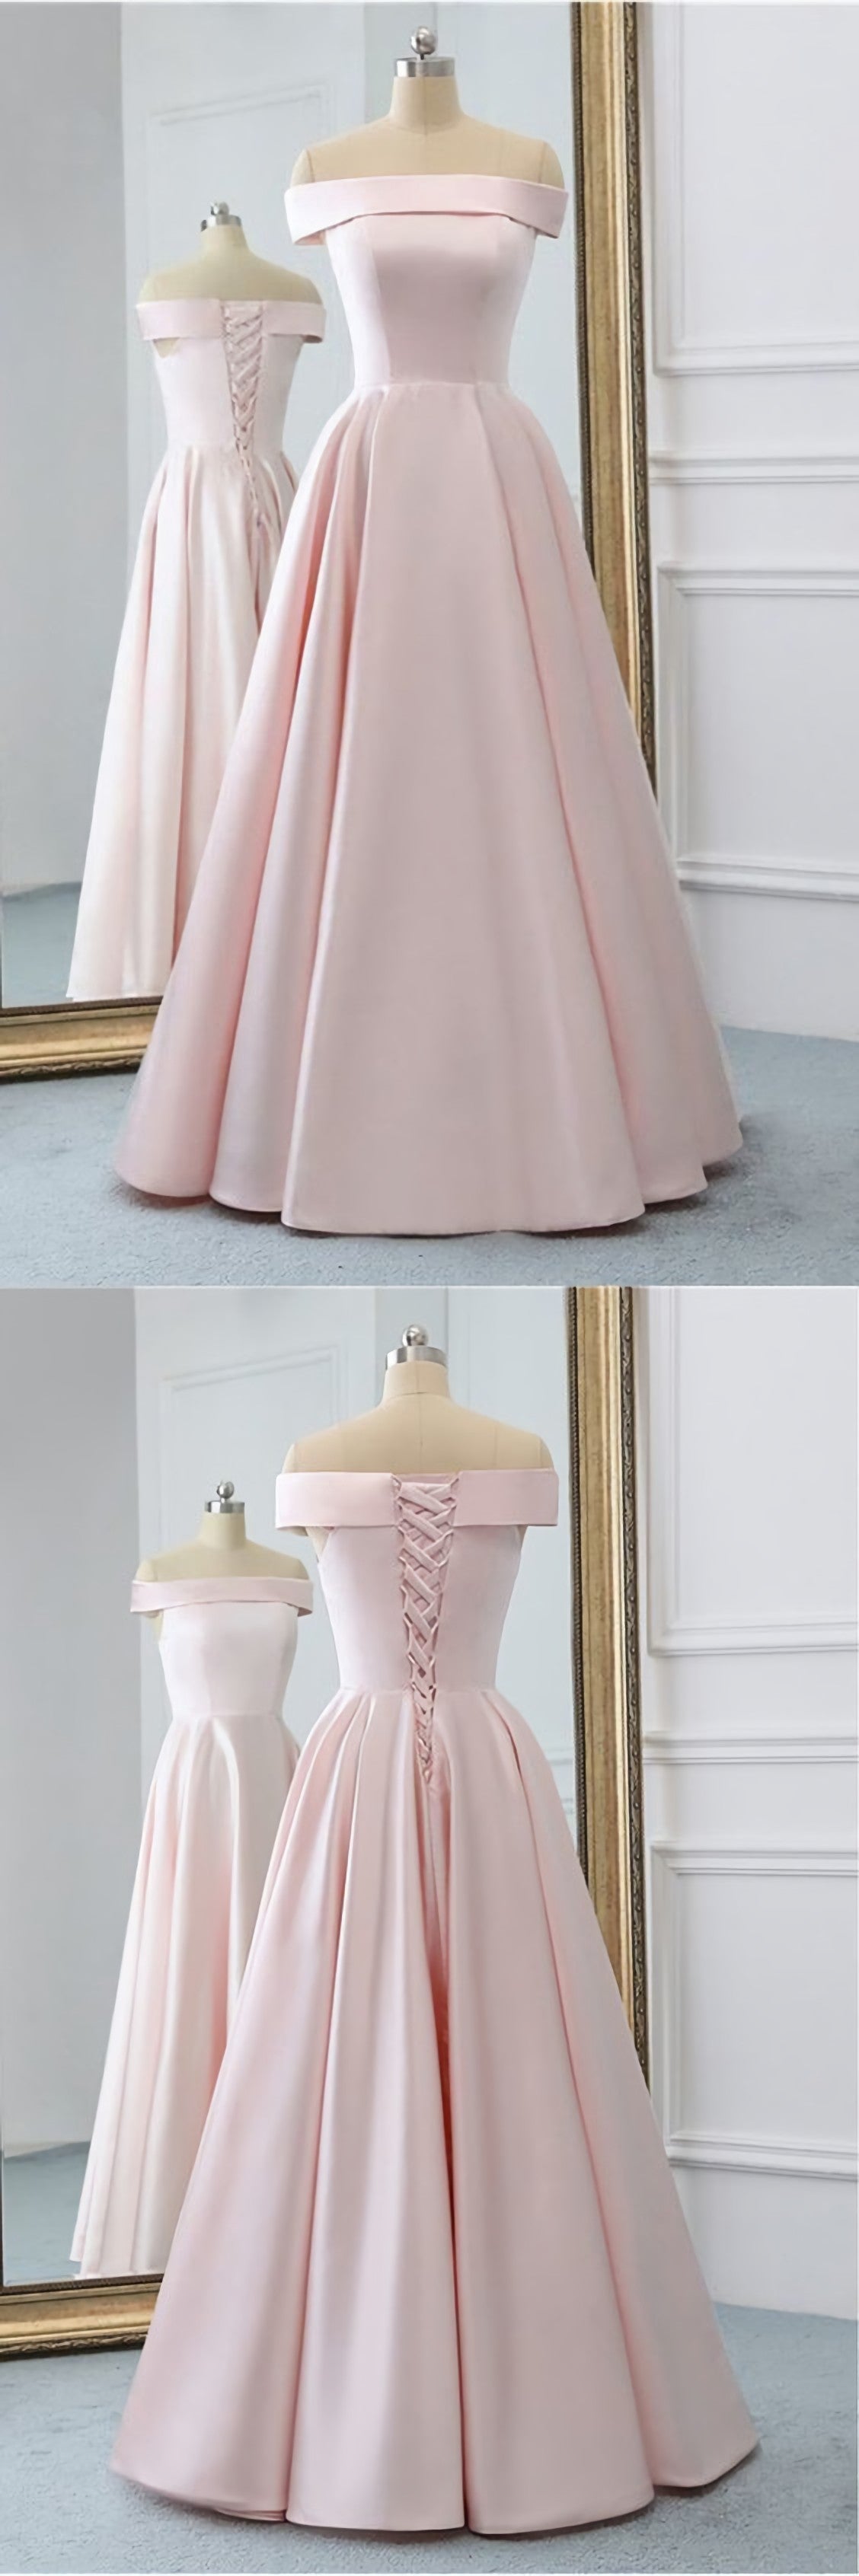 Prom Dress Fairy, Pink Satin Long Evening Dress, With Pockets Pink Prom Gowns